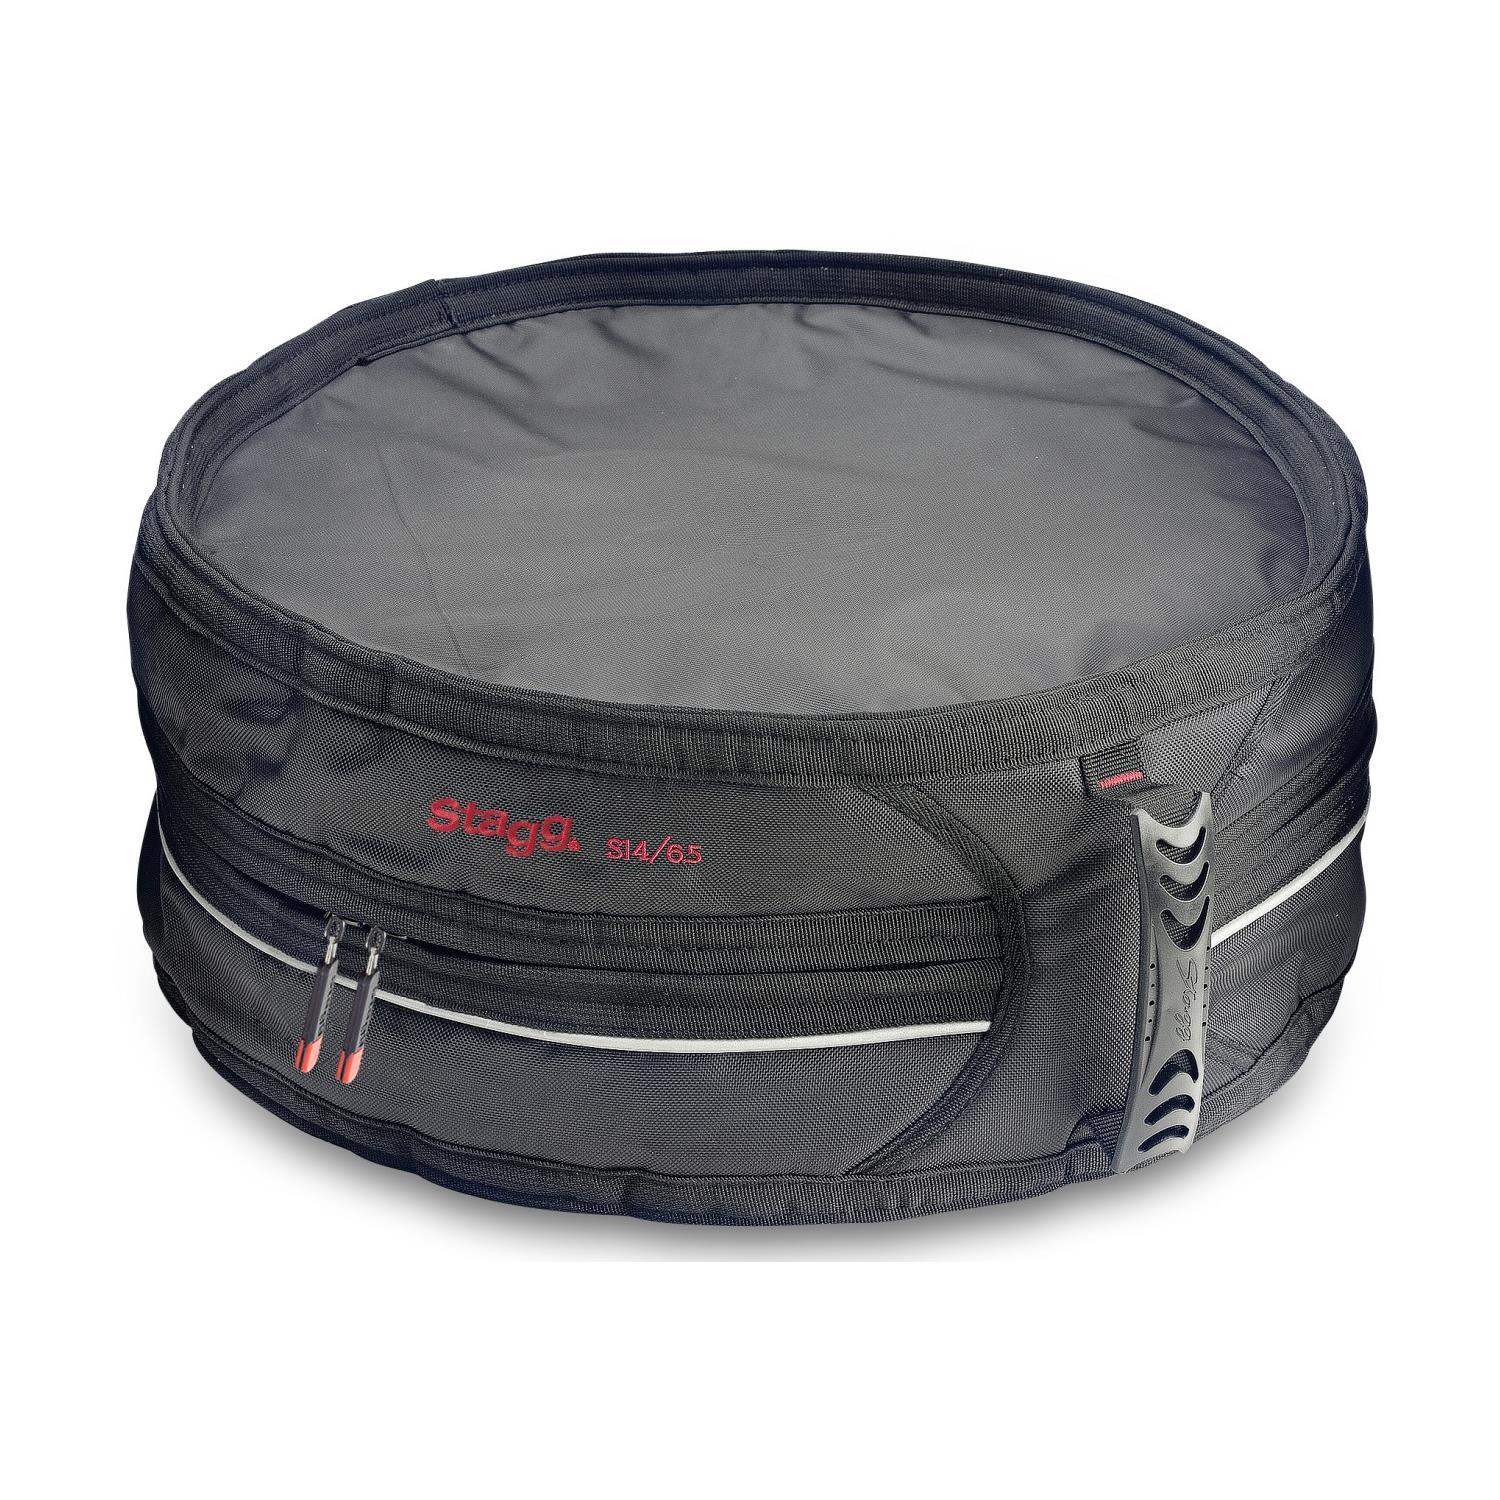 Stagg SSDB-14/6.5 Professional Snare Drum Bag - DY Pro Audio